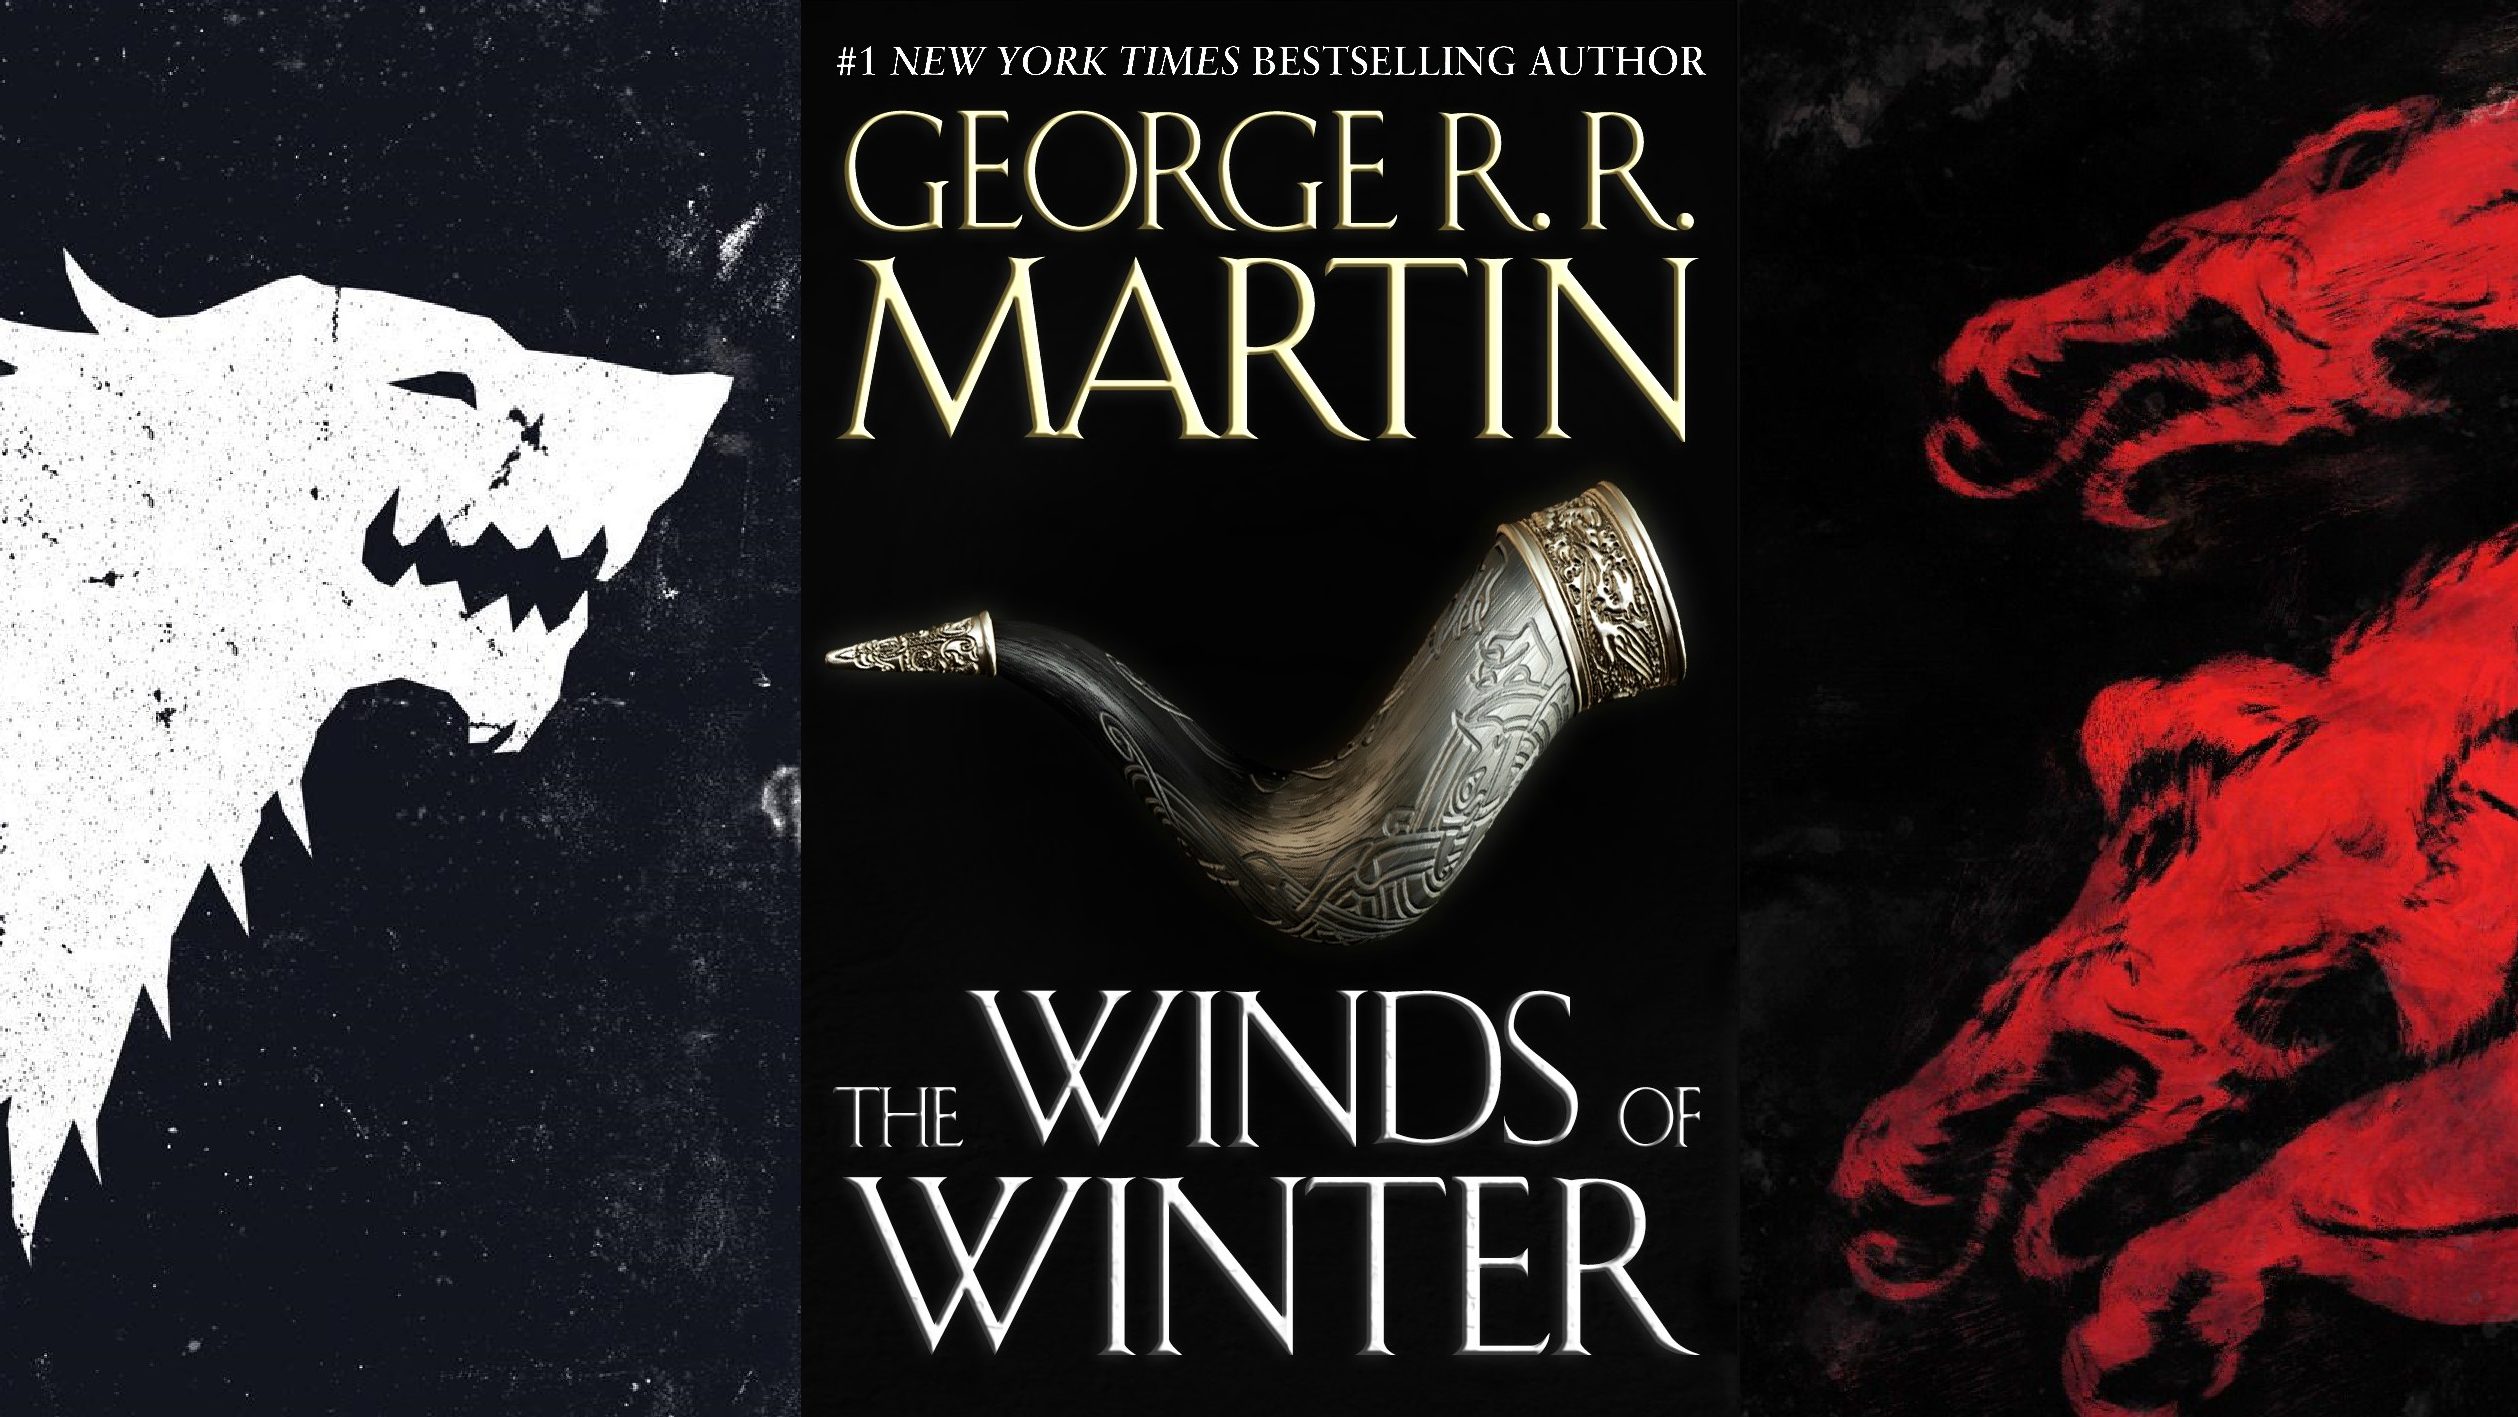 The Winds of Winter will be Finished Early due to Coronavirus Lockdown